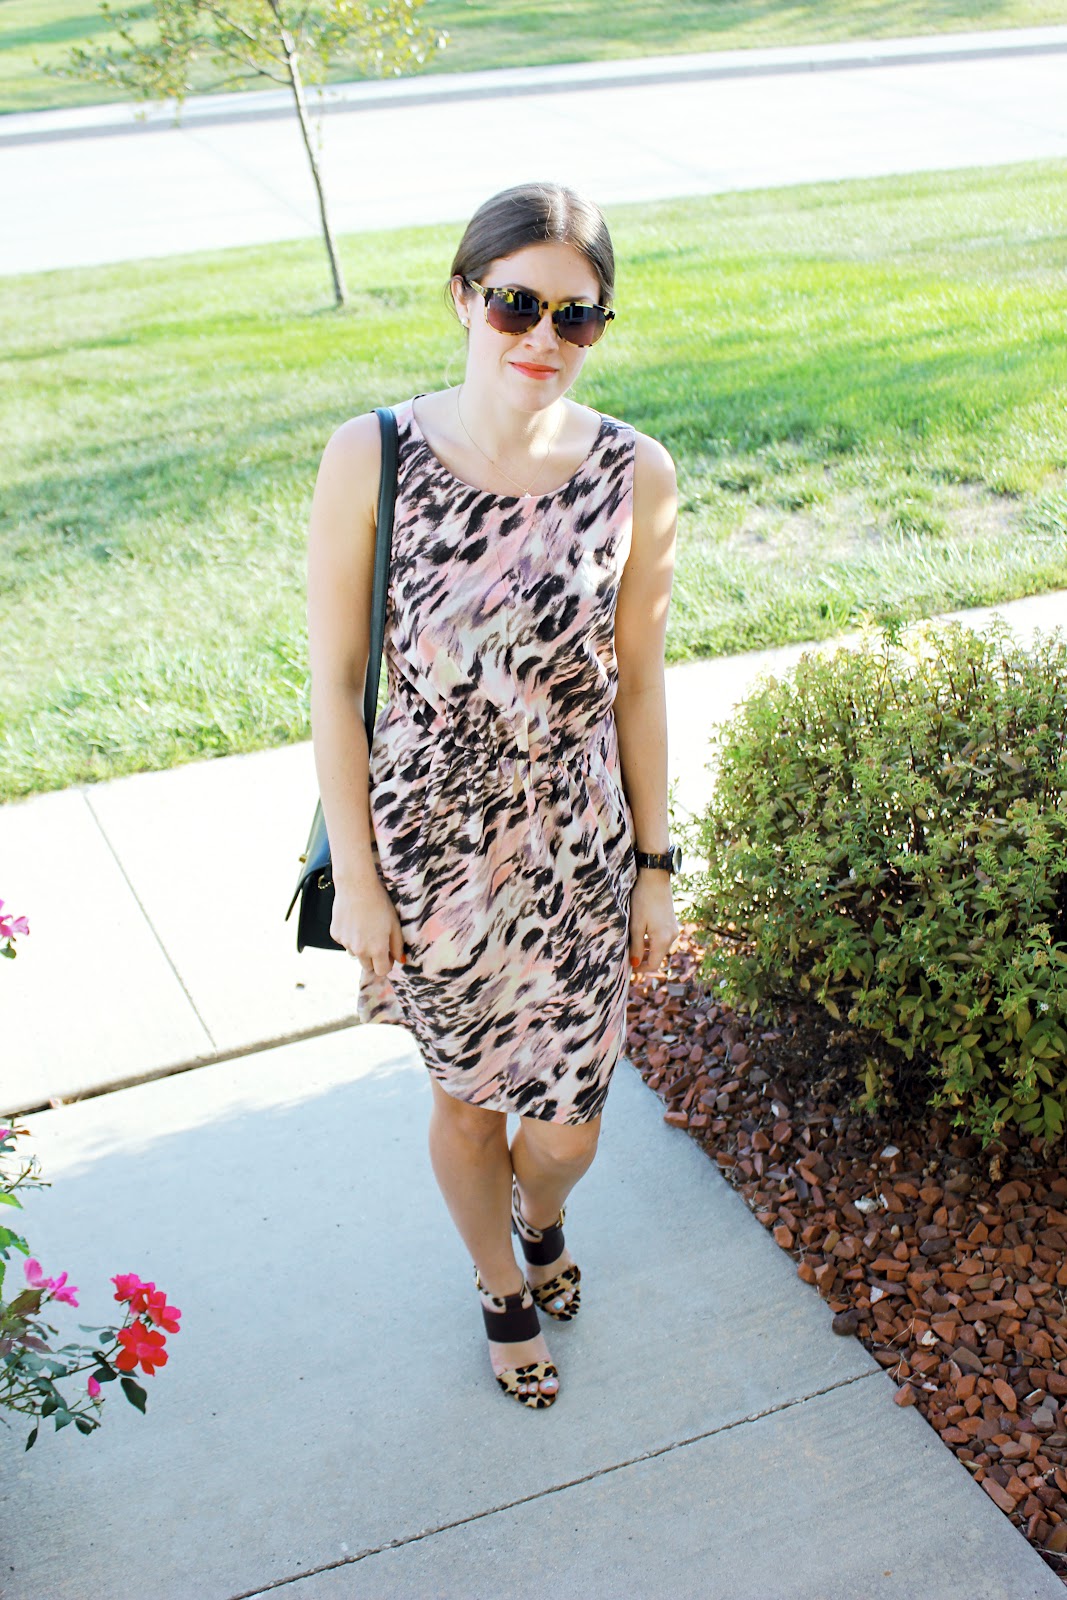 The Brunette One: My Style: Mixing Prints